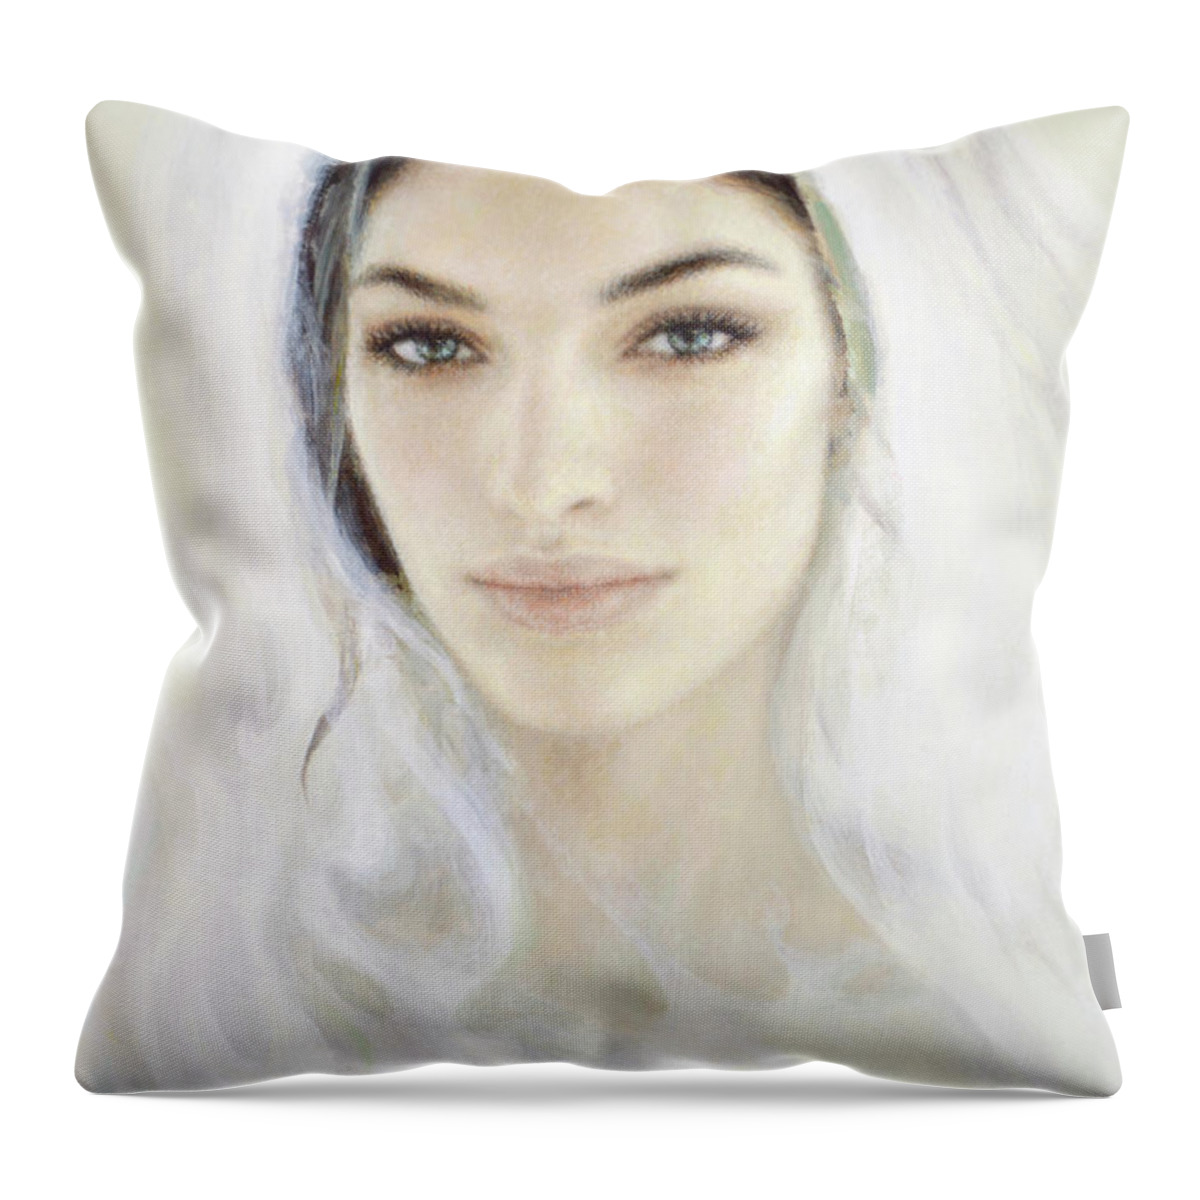 Our Throw Pillow featuring the painting The Face of Mary by Cameron Smith